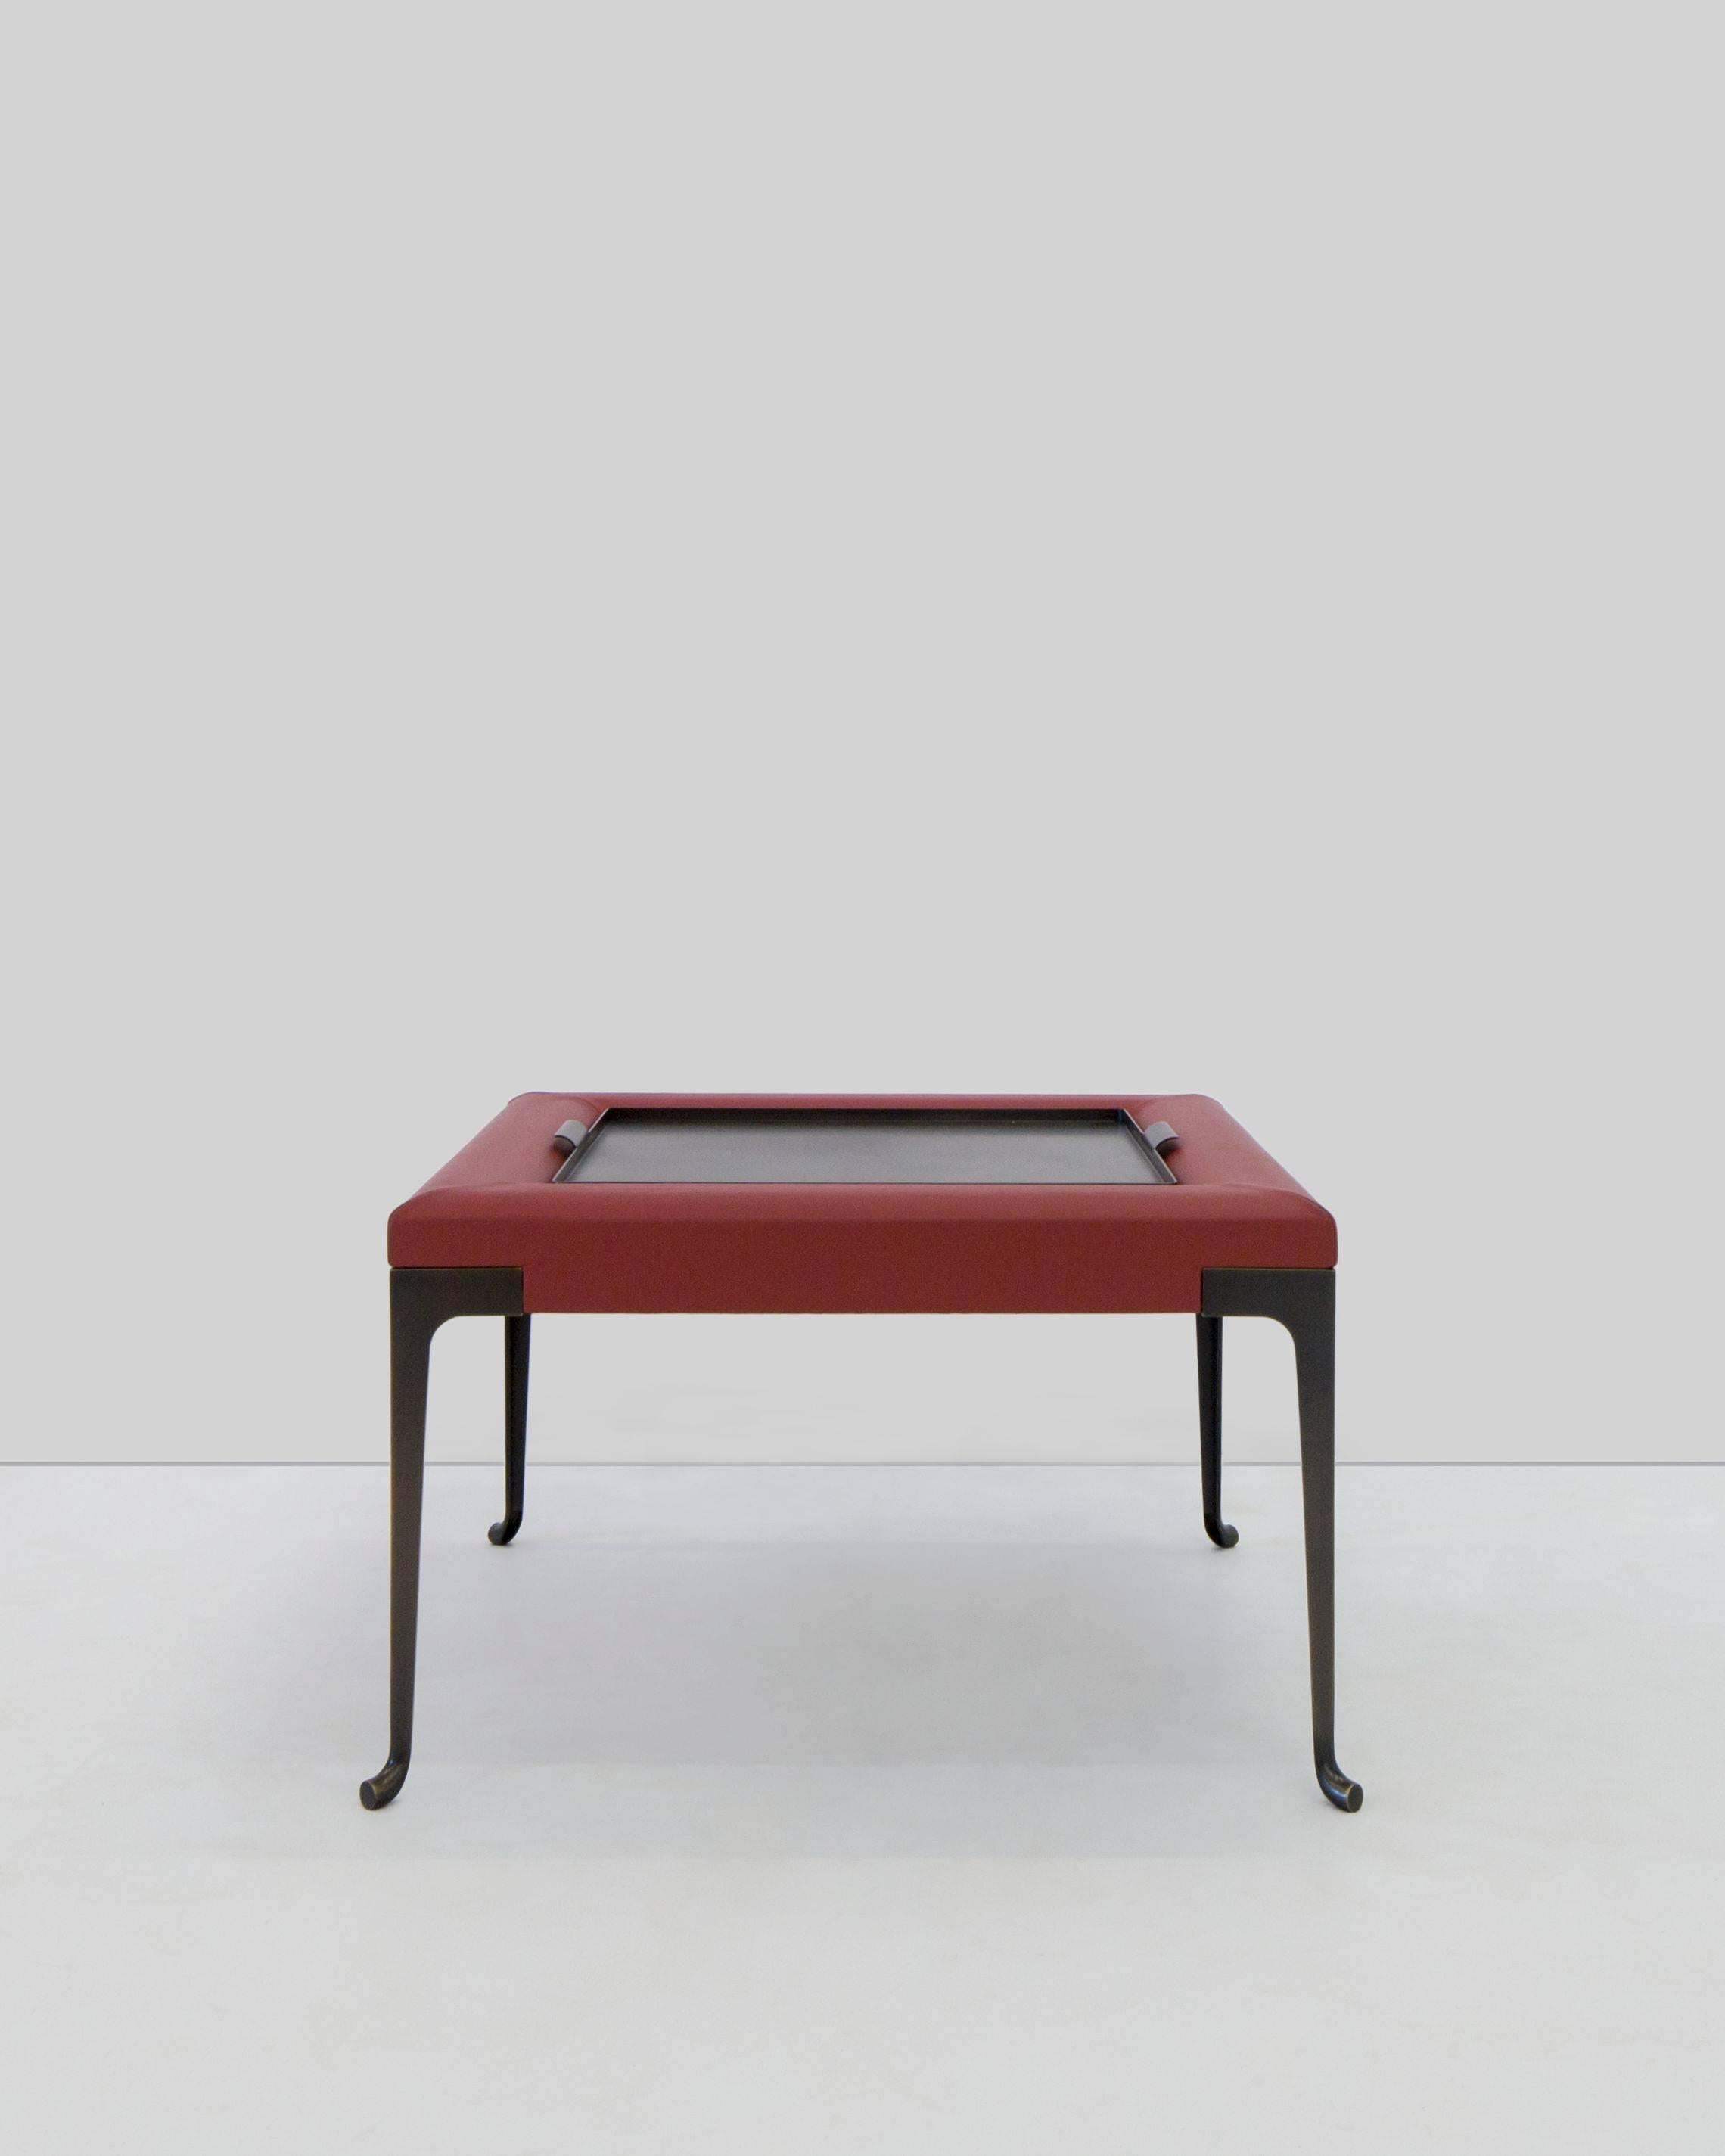 American Mark Zeff, Bronze and Leather Coffee Table, USA, 2015